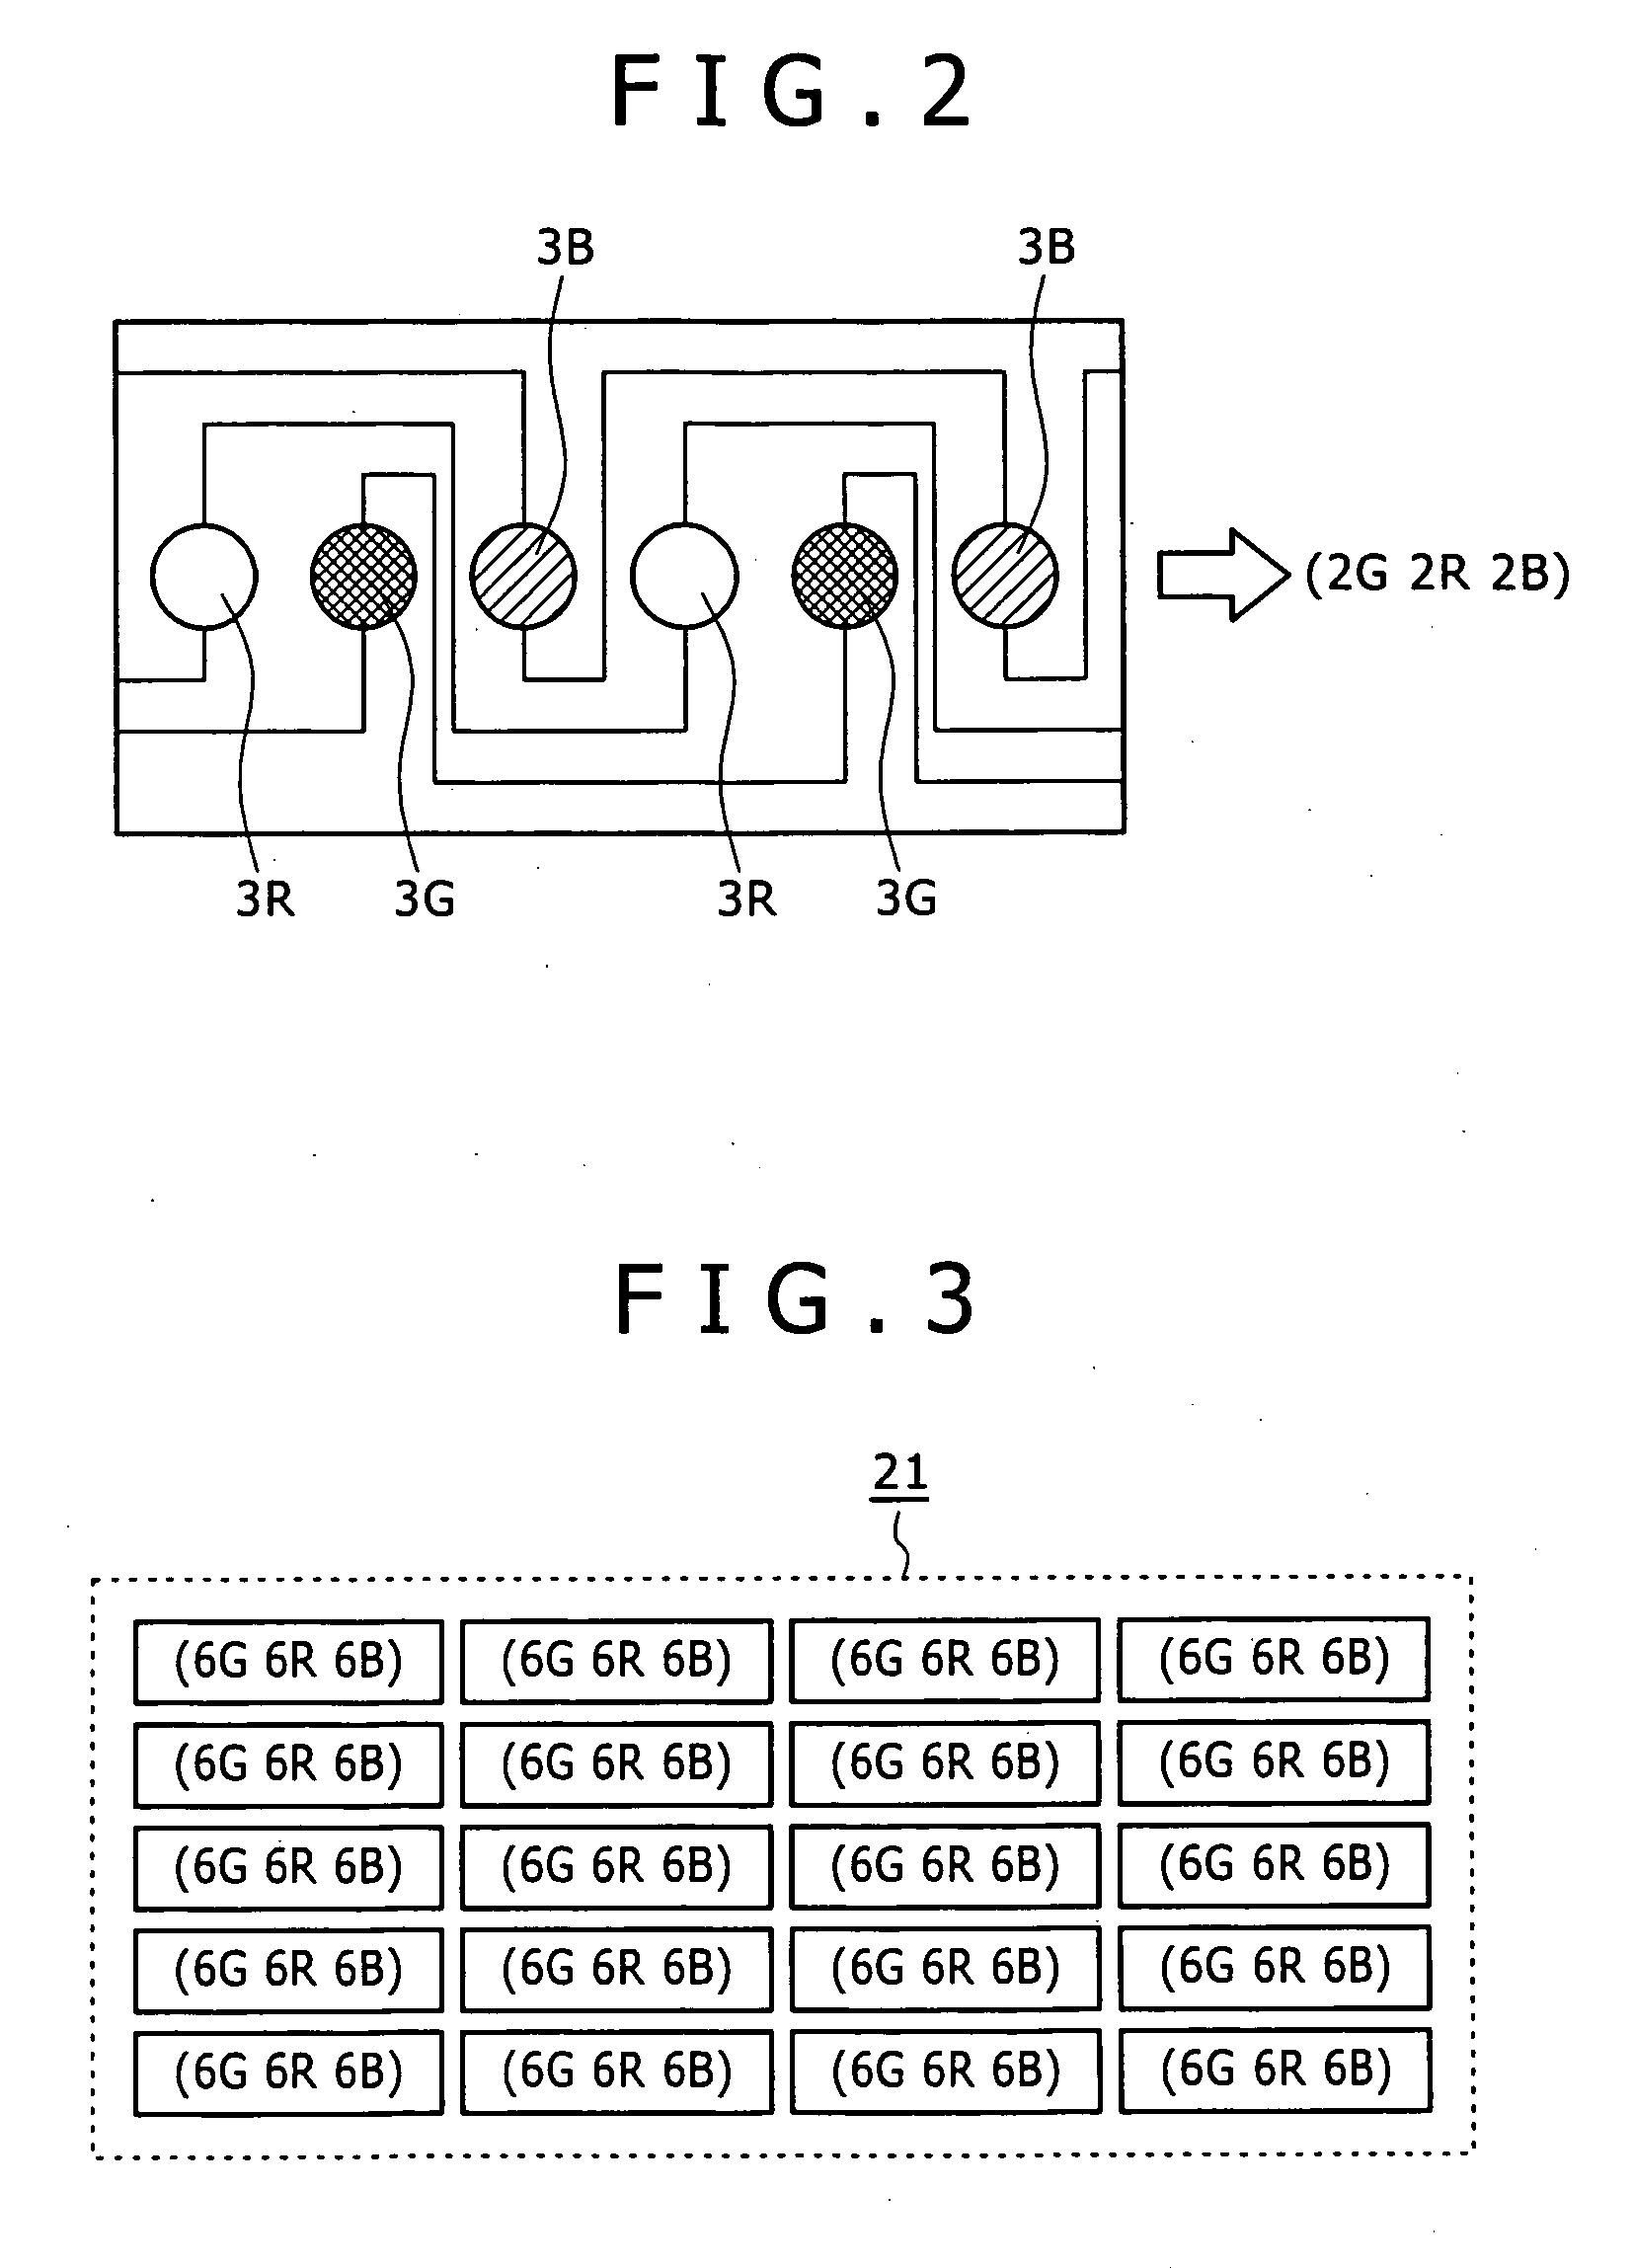 Backlight device, method of driving backlight and liquid crystal display apparatus